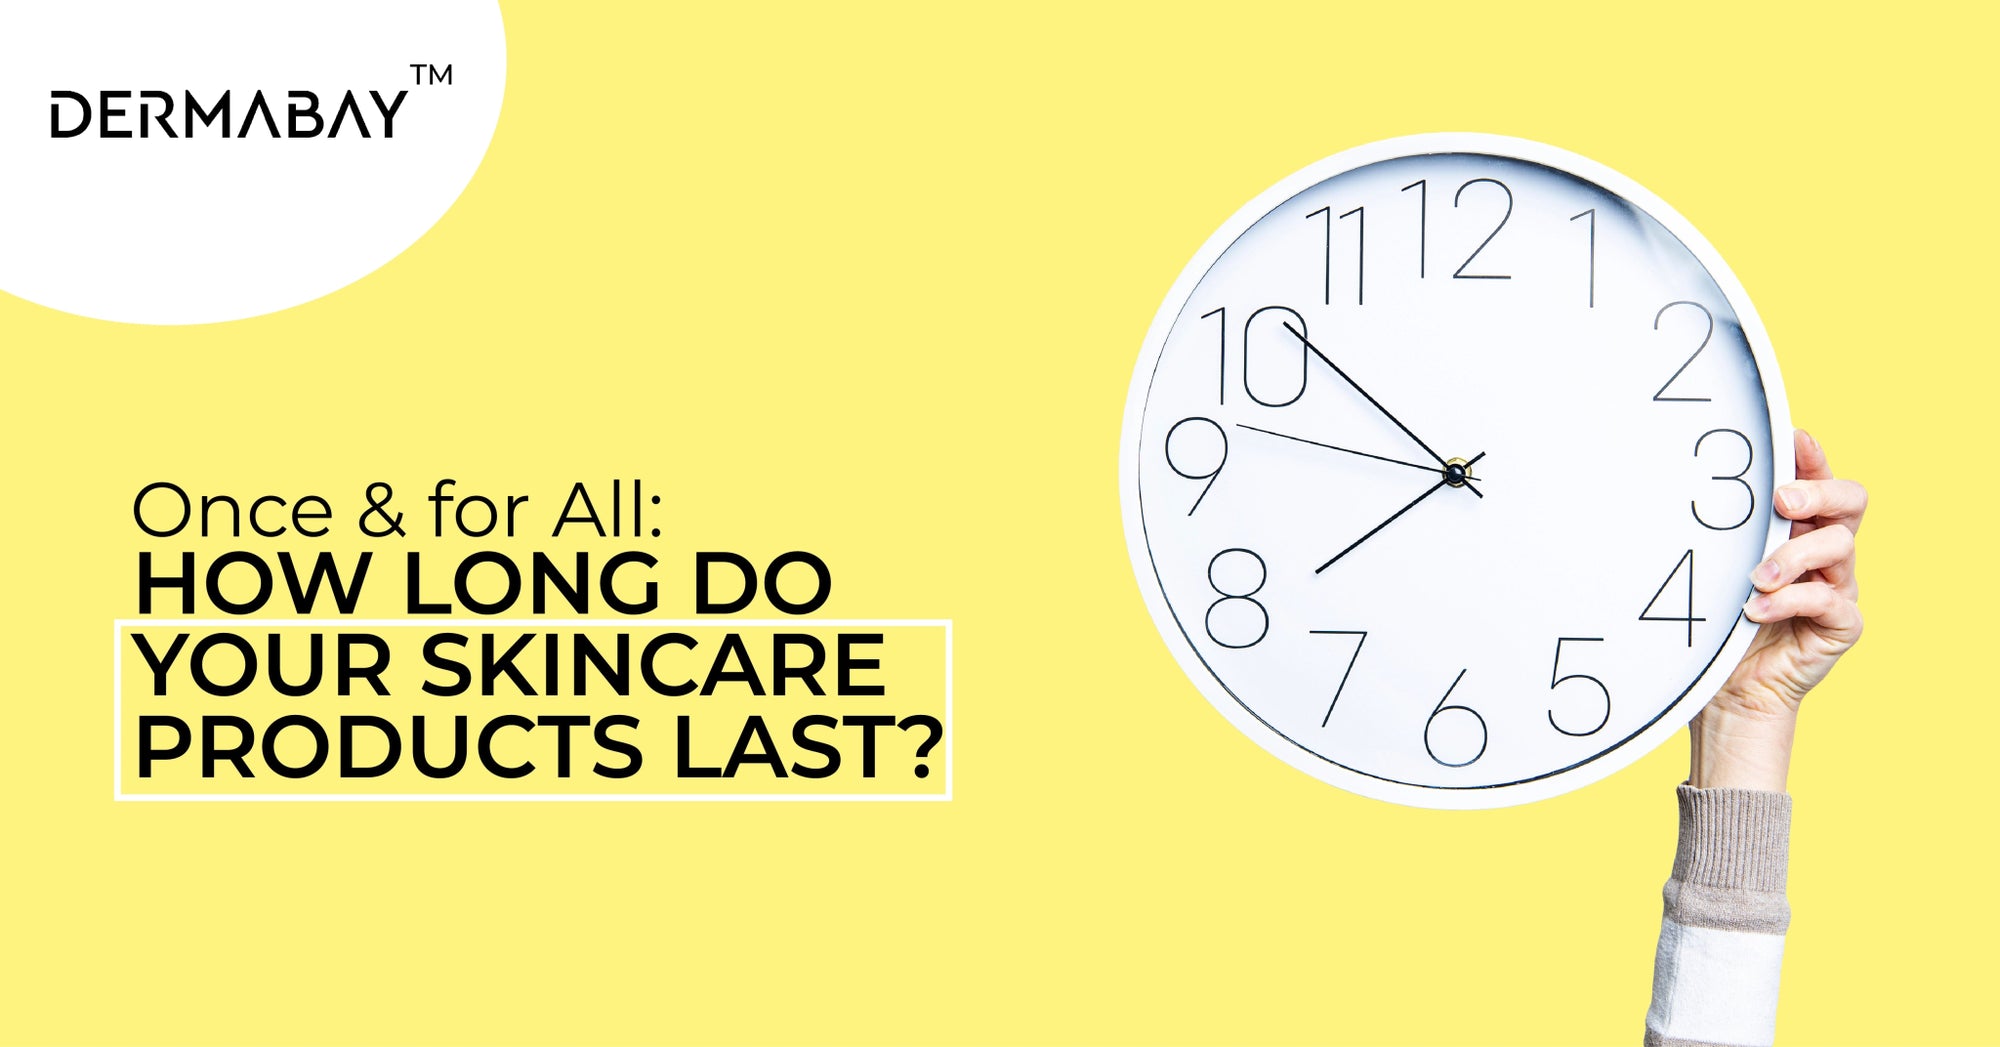 Once & for All: How Long Do Your Skincare Products Last? - Dermabay